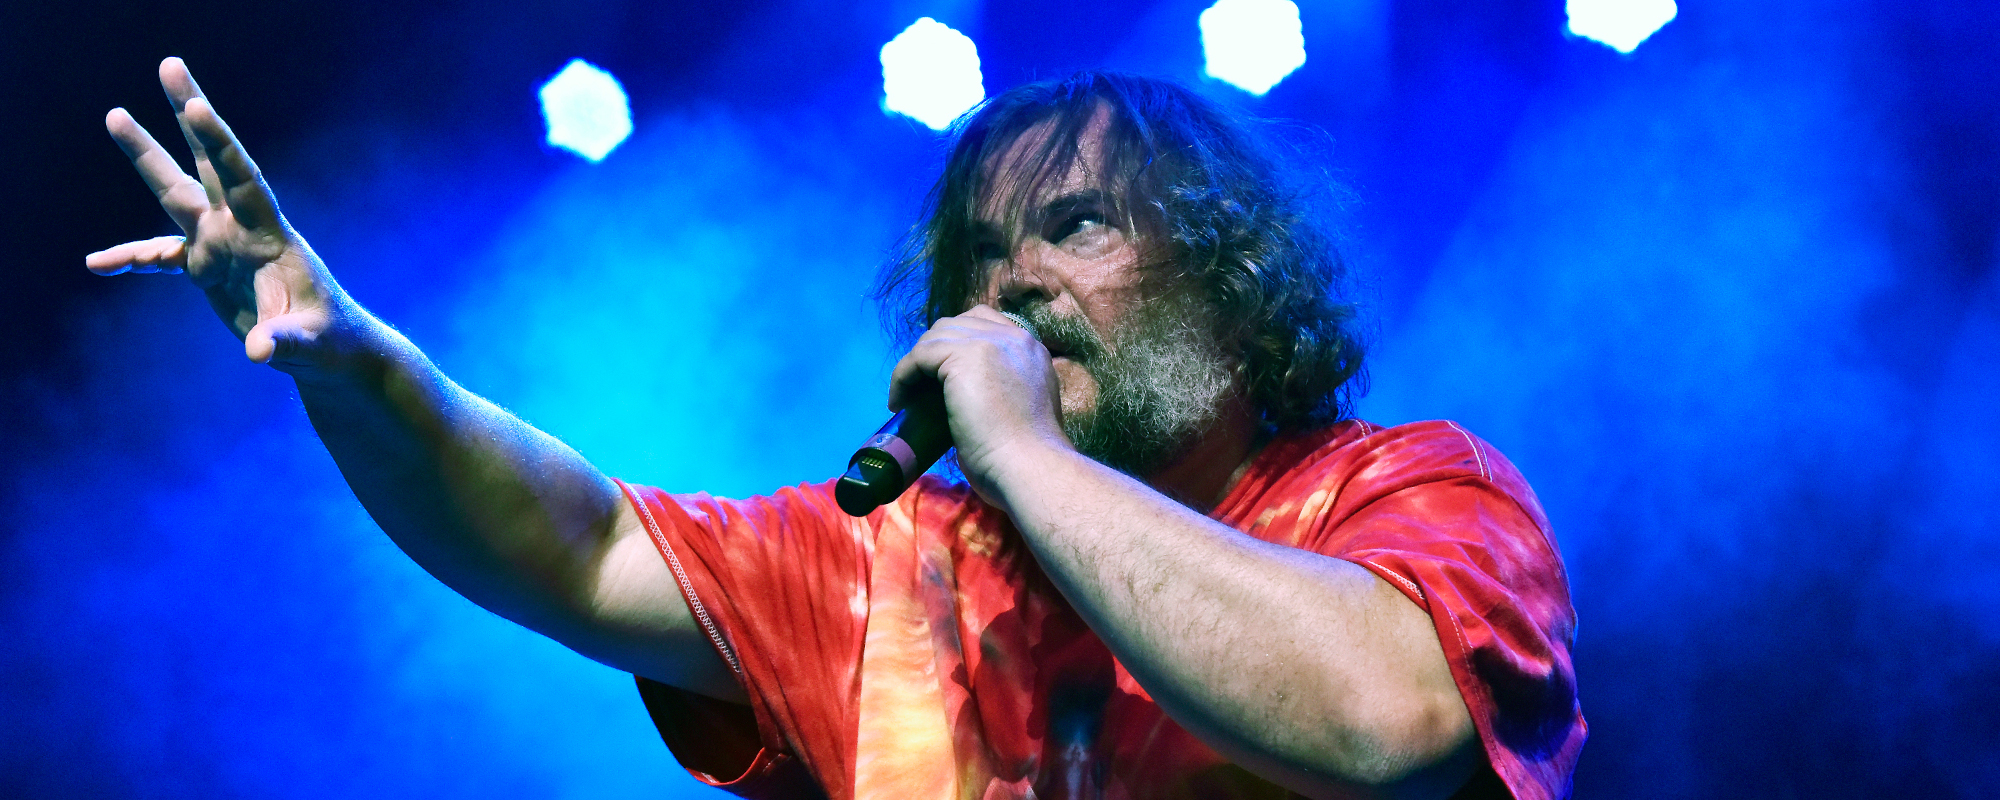 Watch Tenacious D Nail “Wicked Game” Cover Along with Beatles Medley